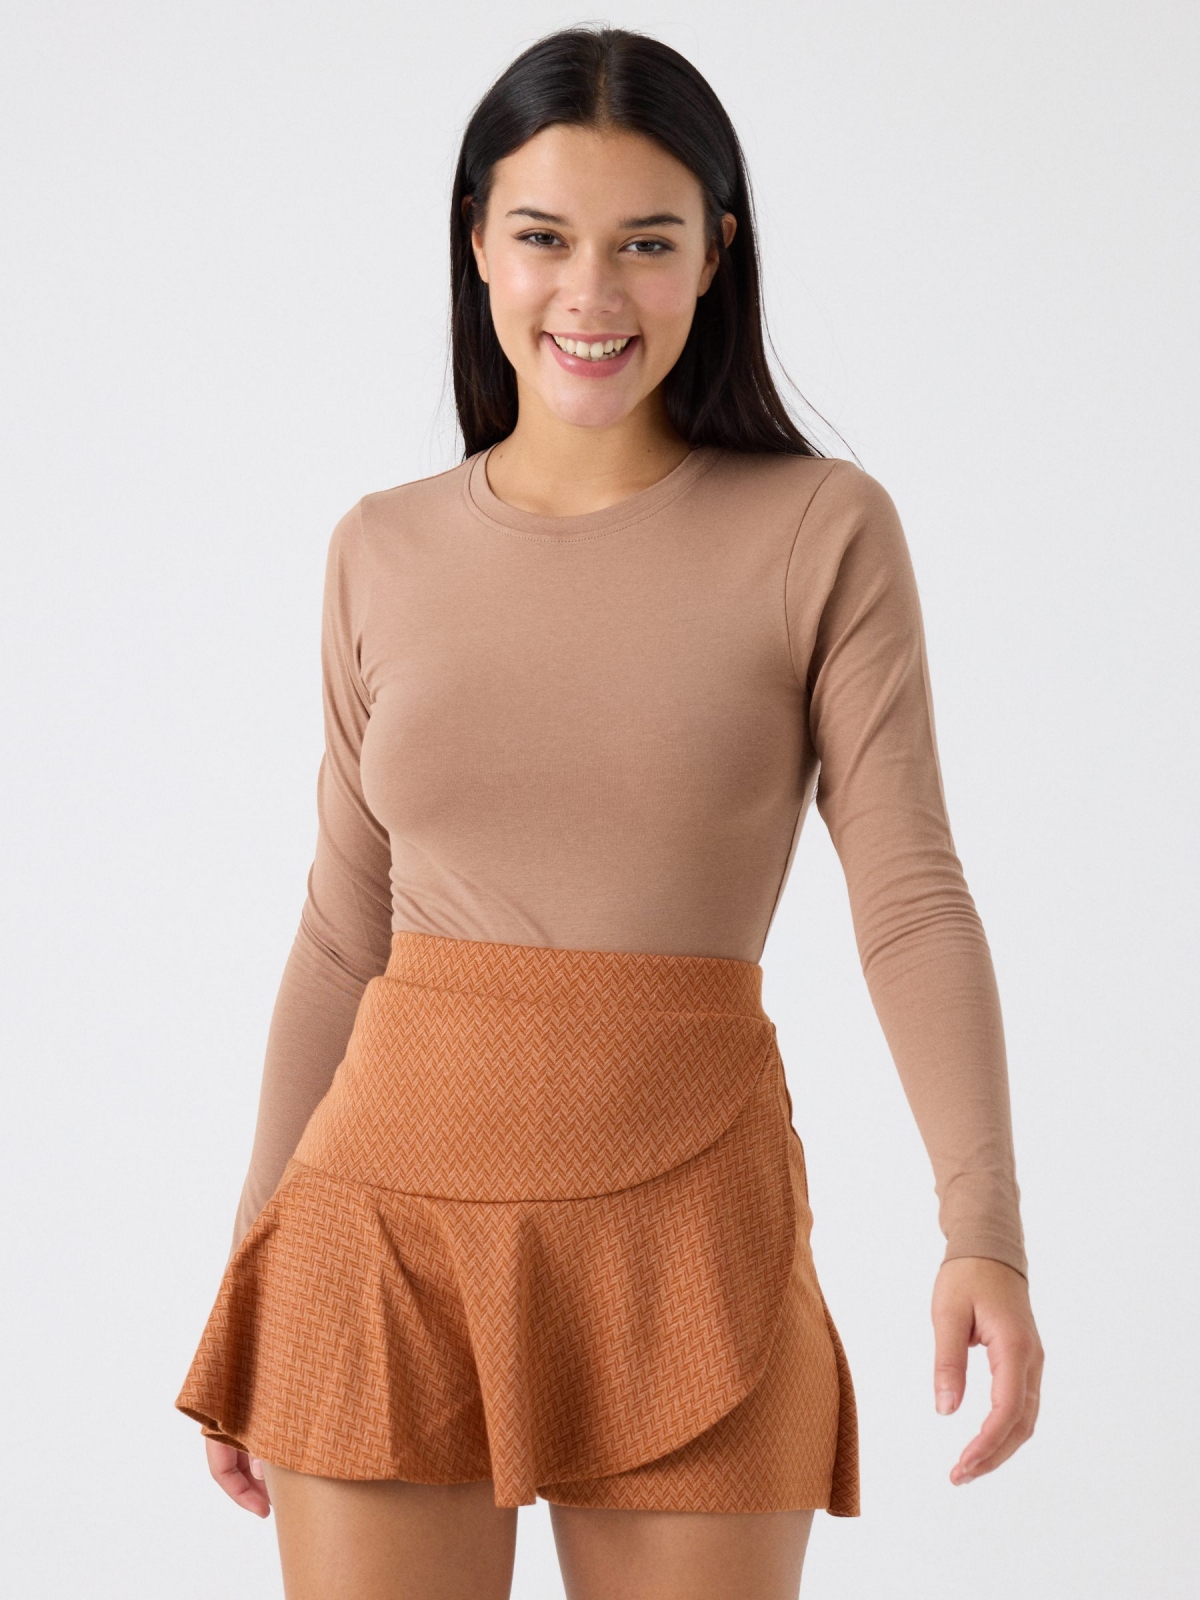 Retro style skort cinnamon middle front view